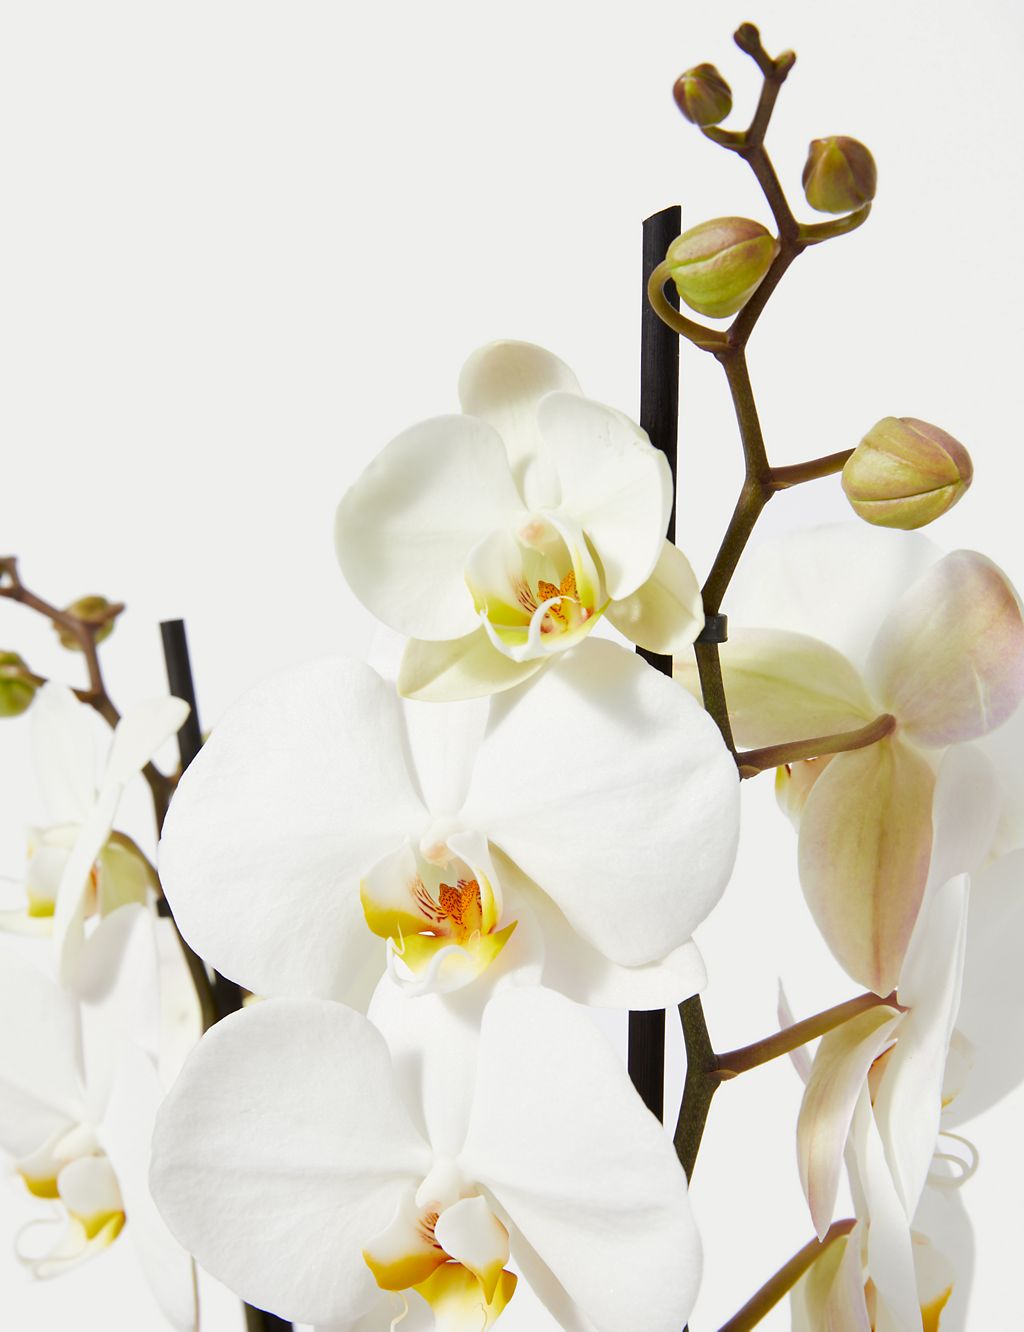 Large White Phalaenopsis Orchid in Ceramic Pot 2 of 4